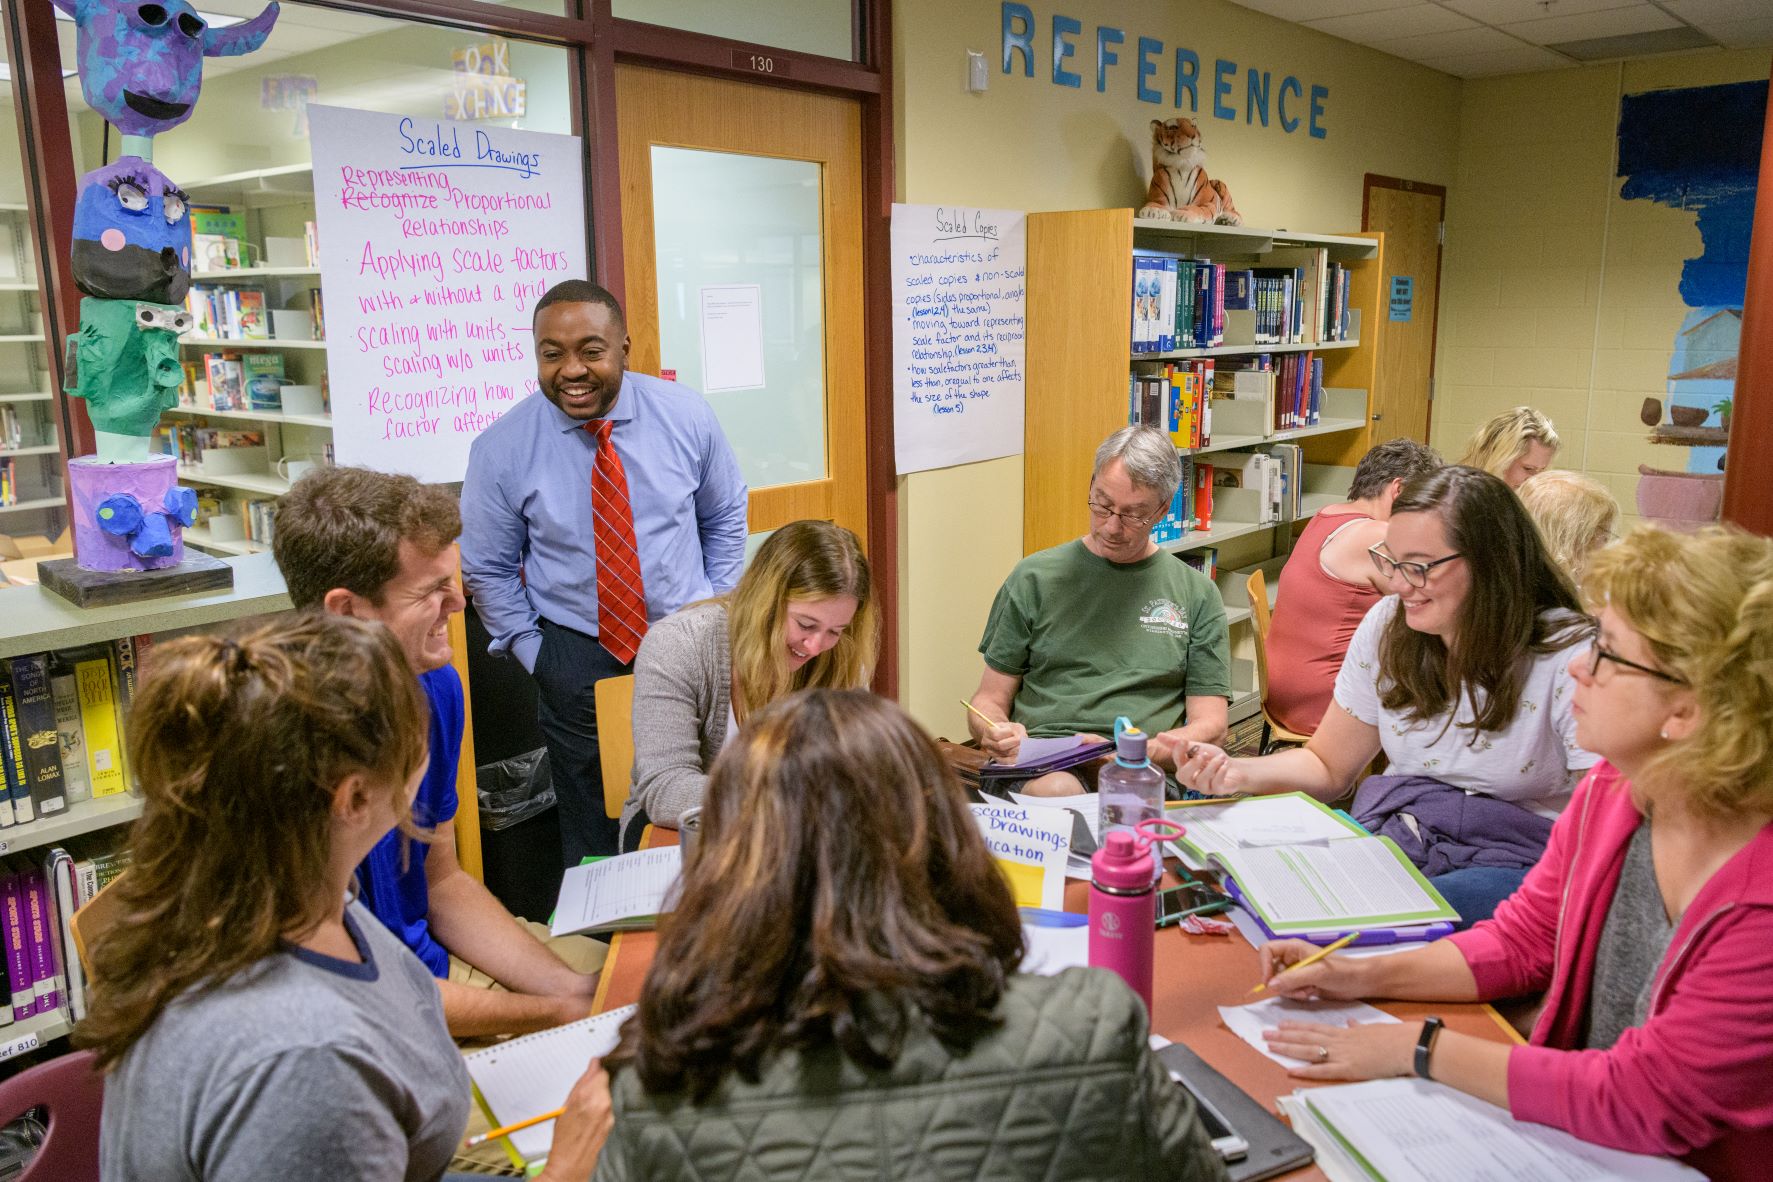 Staff from UD’s Professional Development Center for Educators (PDCE) engage in a professional development session with math teachers from several schools at Talley Middle School in Wilmington, Delaware.